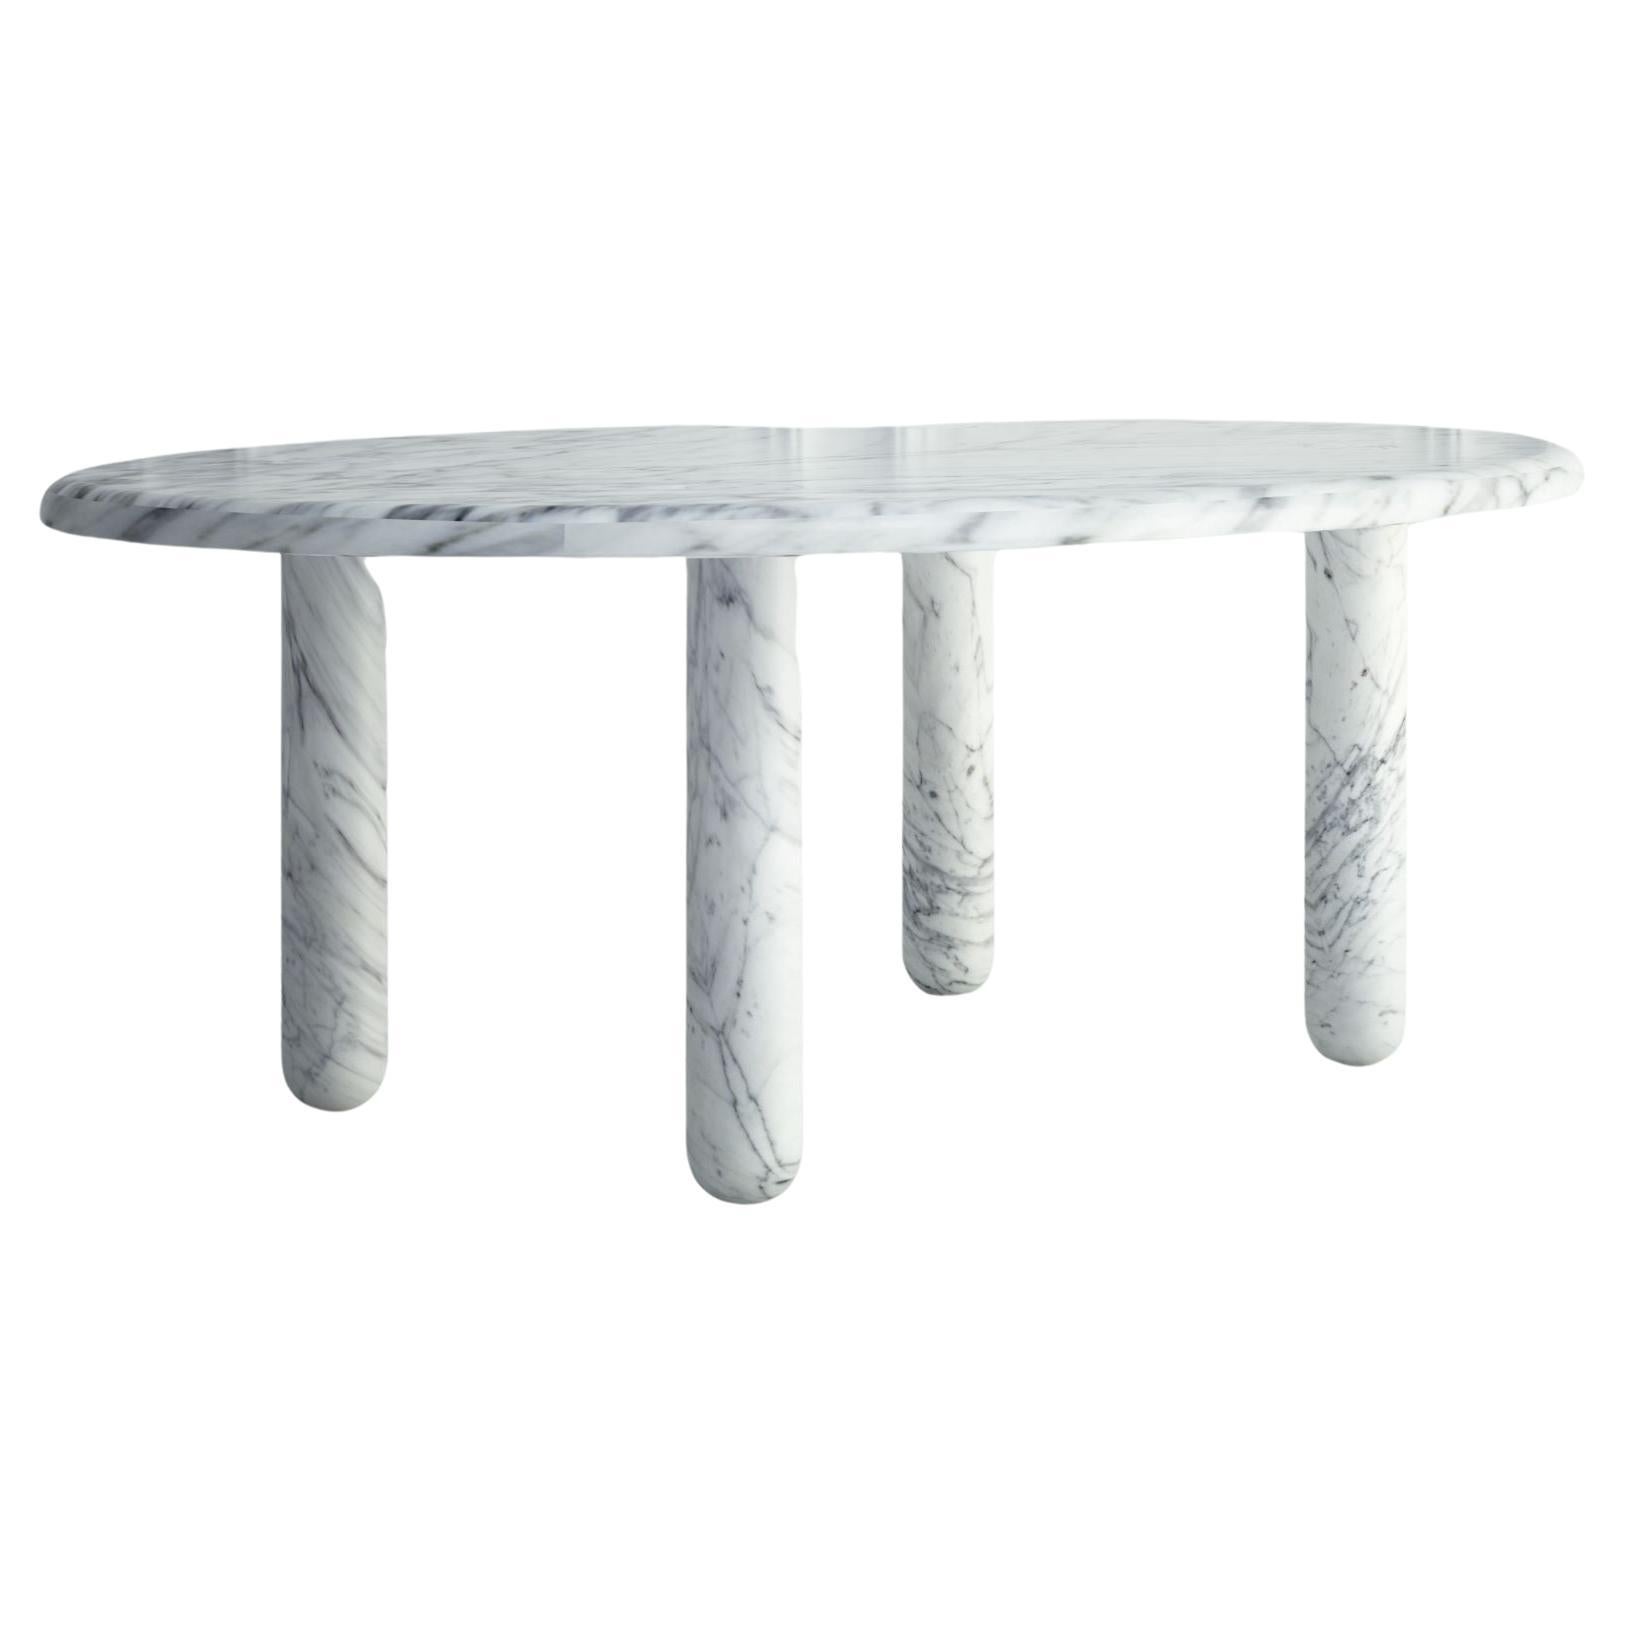 The Delphine: A Modern Stone Dining Table with an Oval Top and 4 Rounded Legs